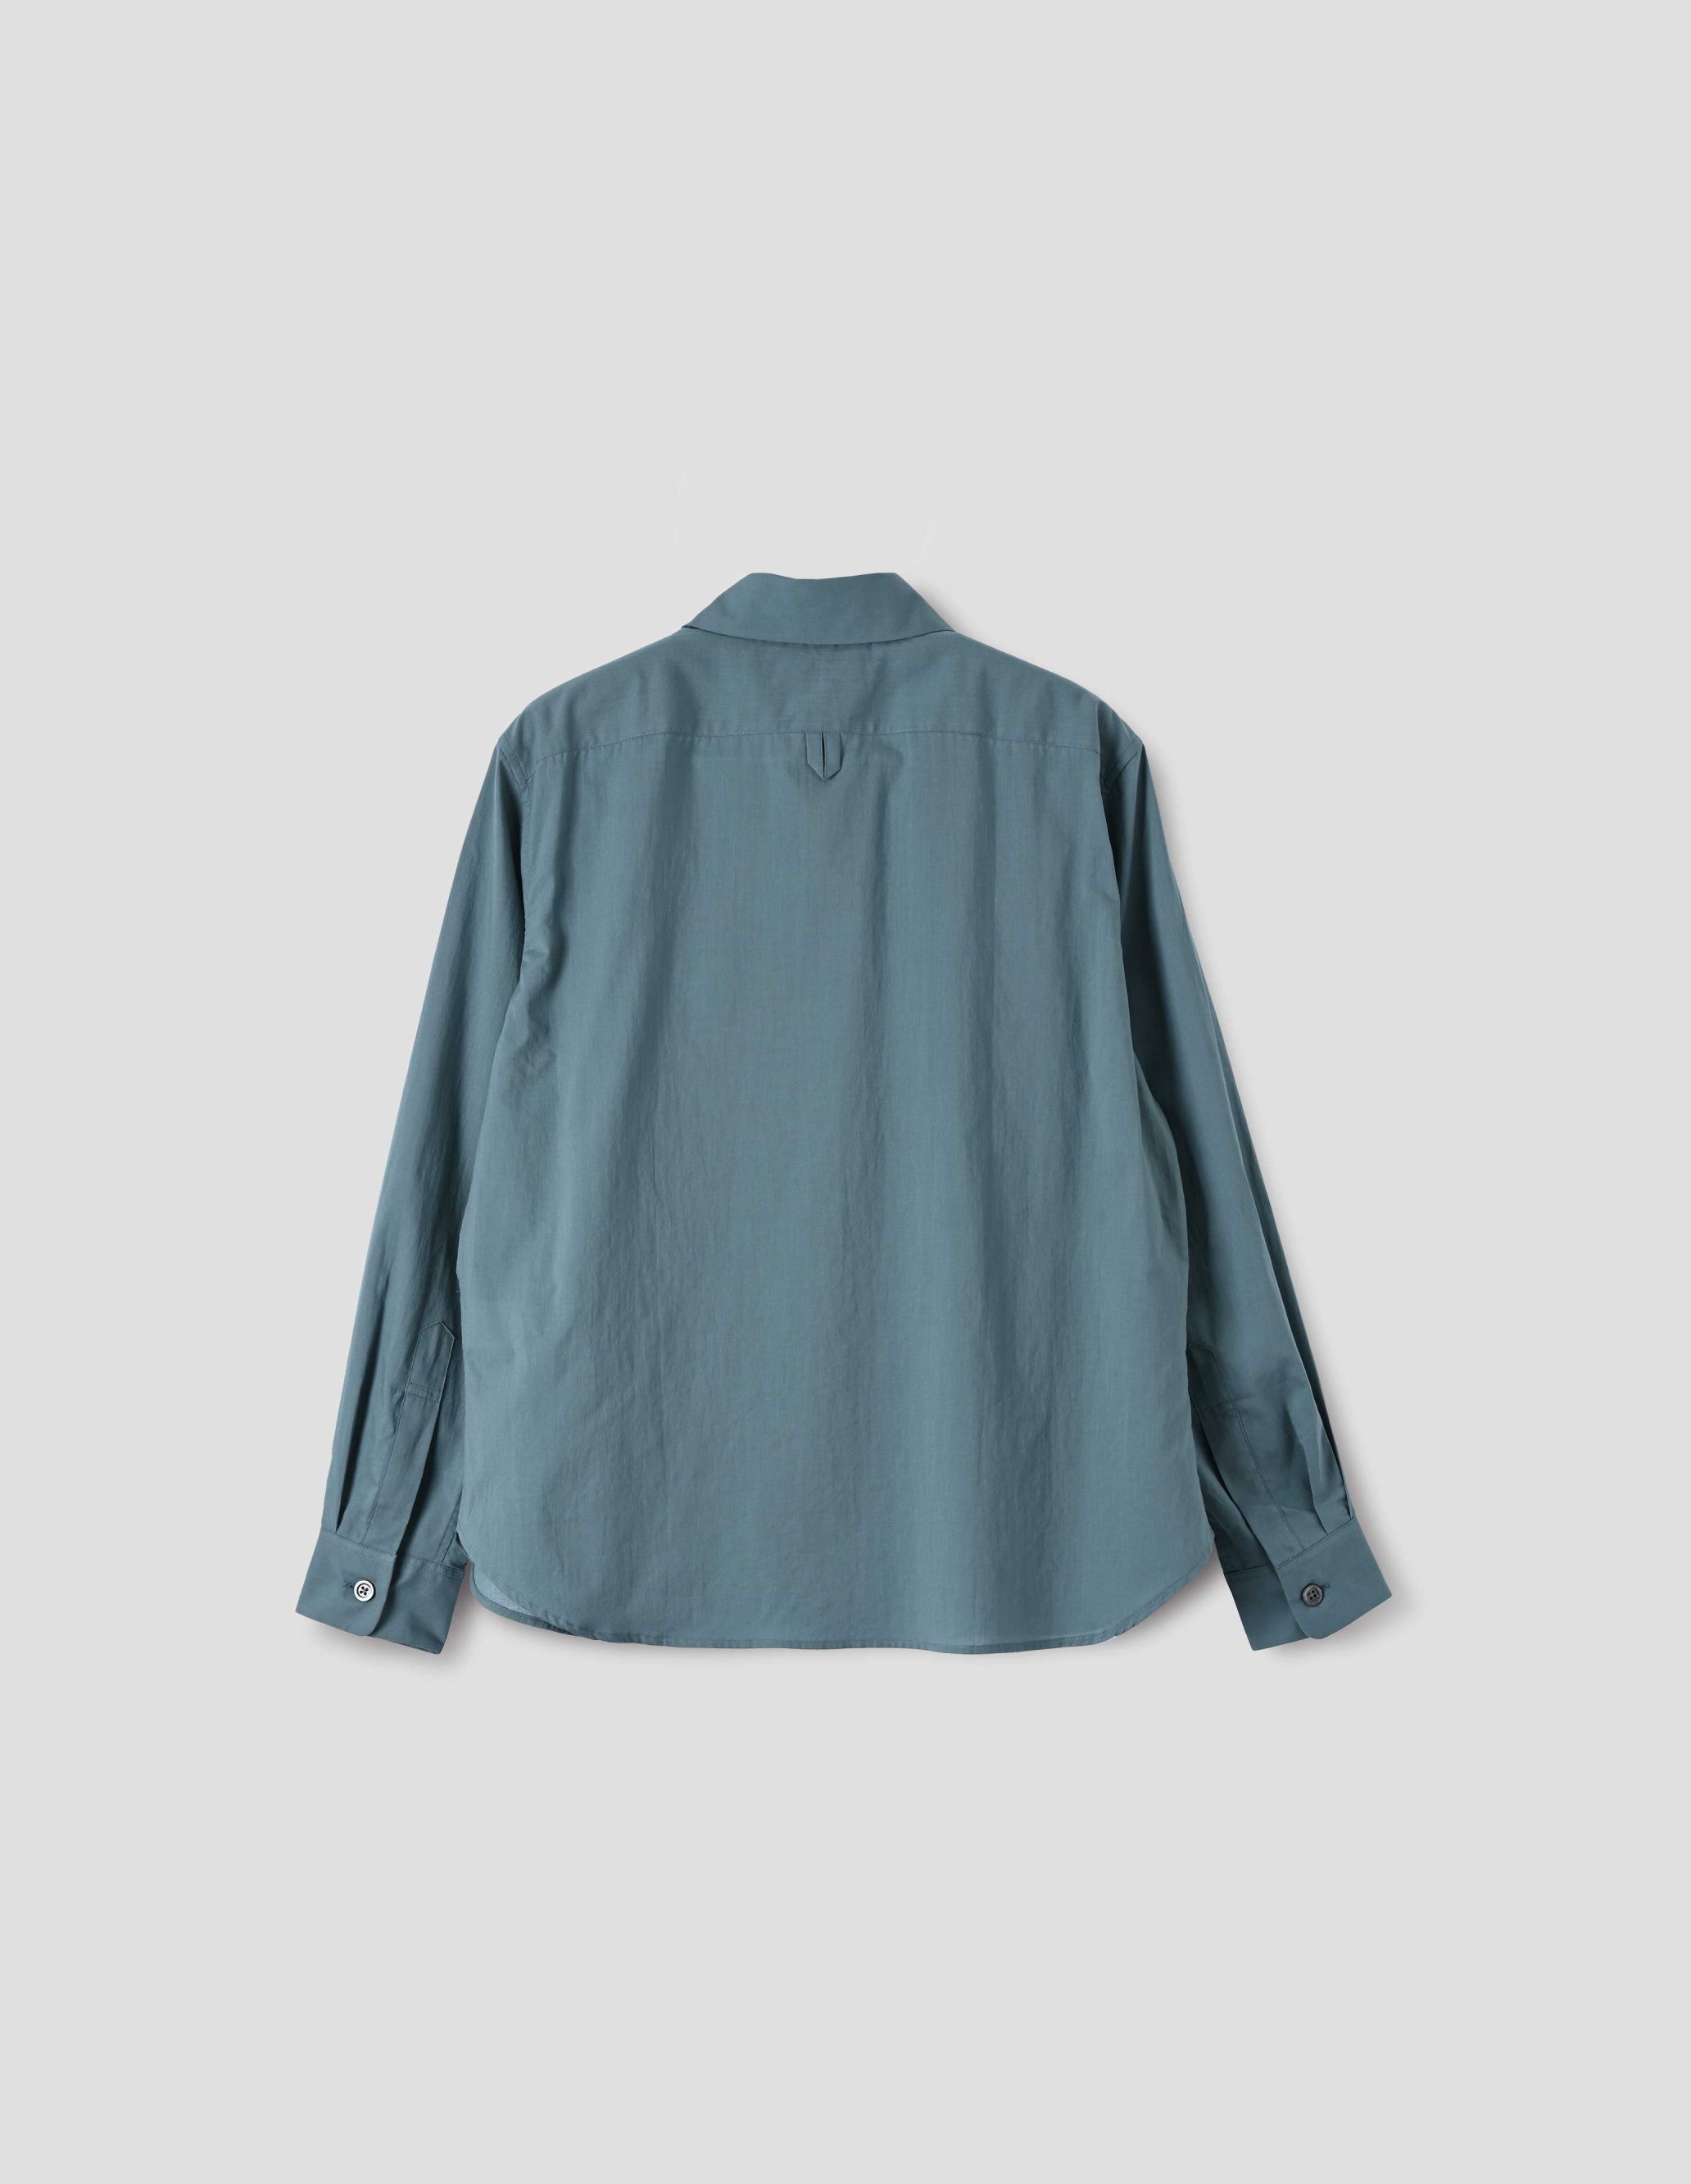 MARGARET HOWELL - Dusty blue washed cotton simple shirt | Margaret Howell